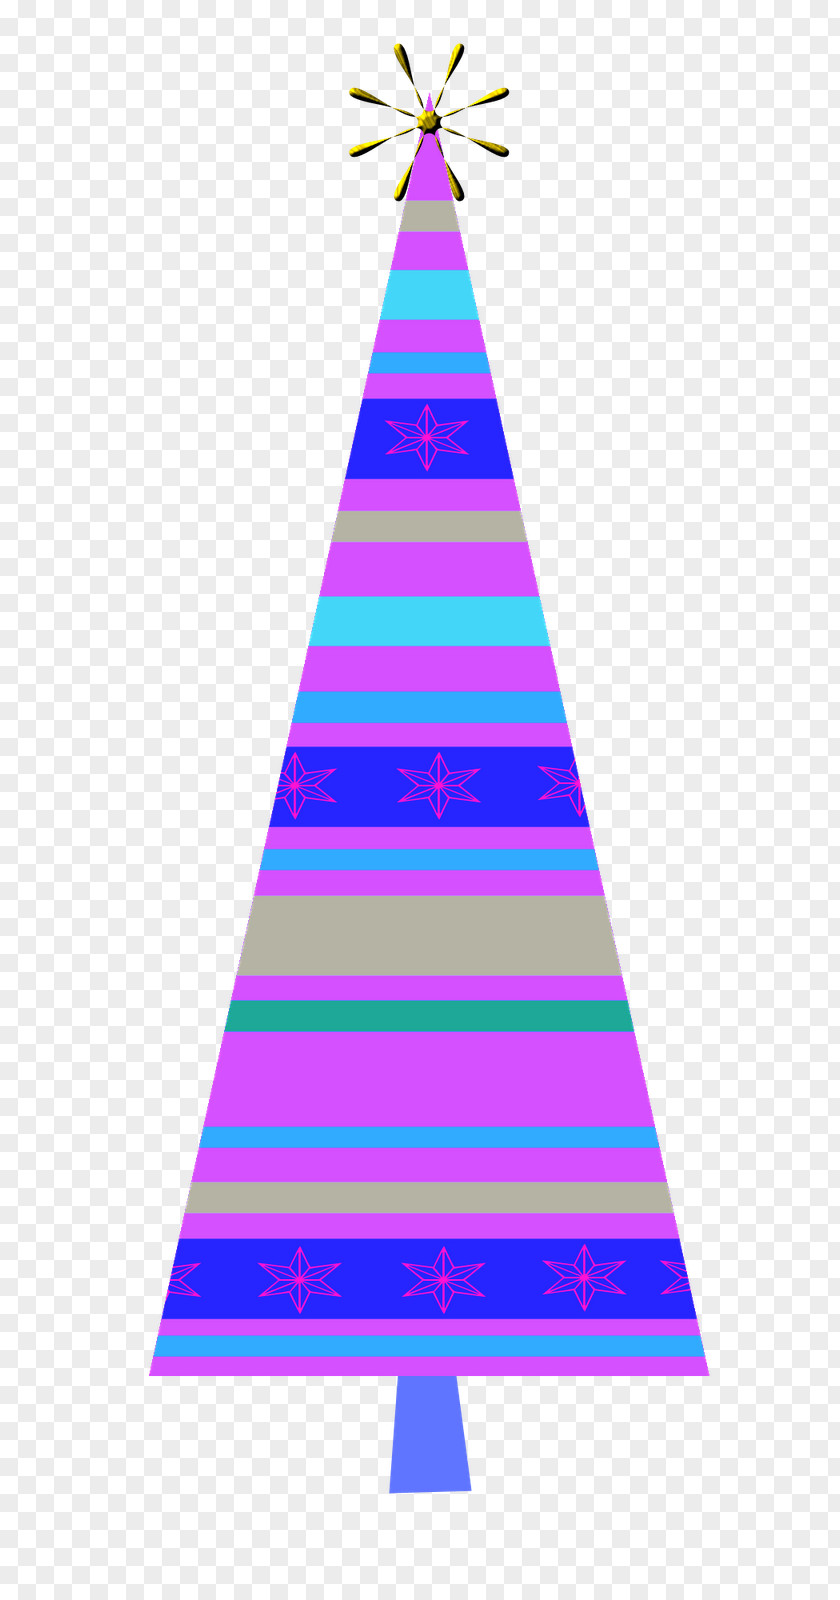 Tree Lady Christmas Triangle Diagram PNG